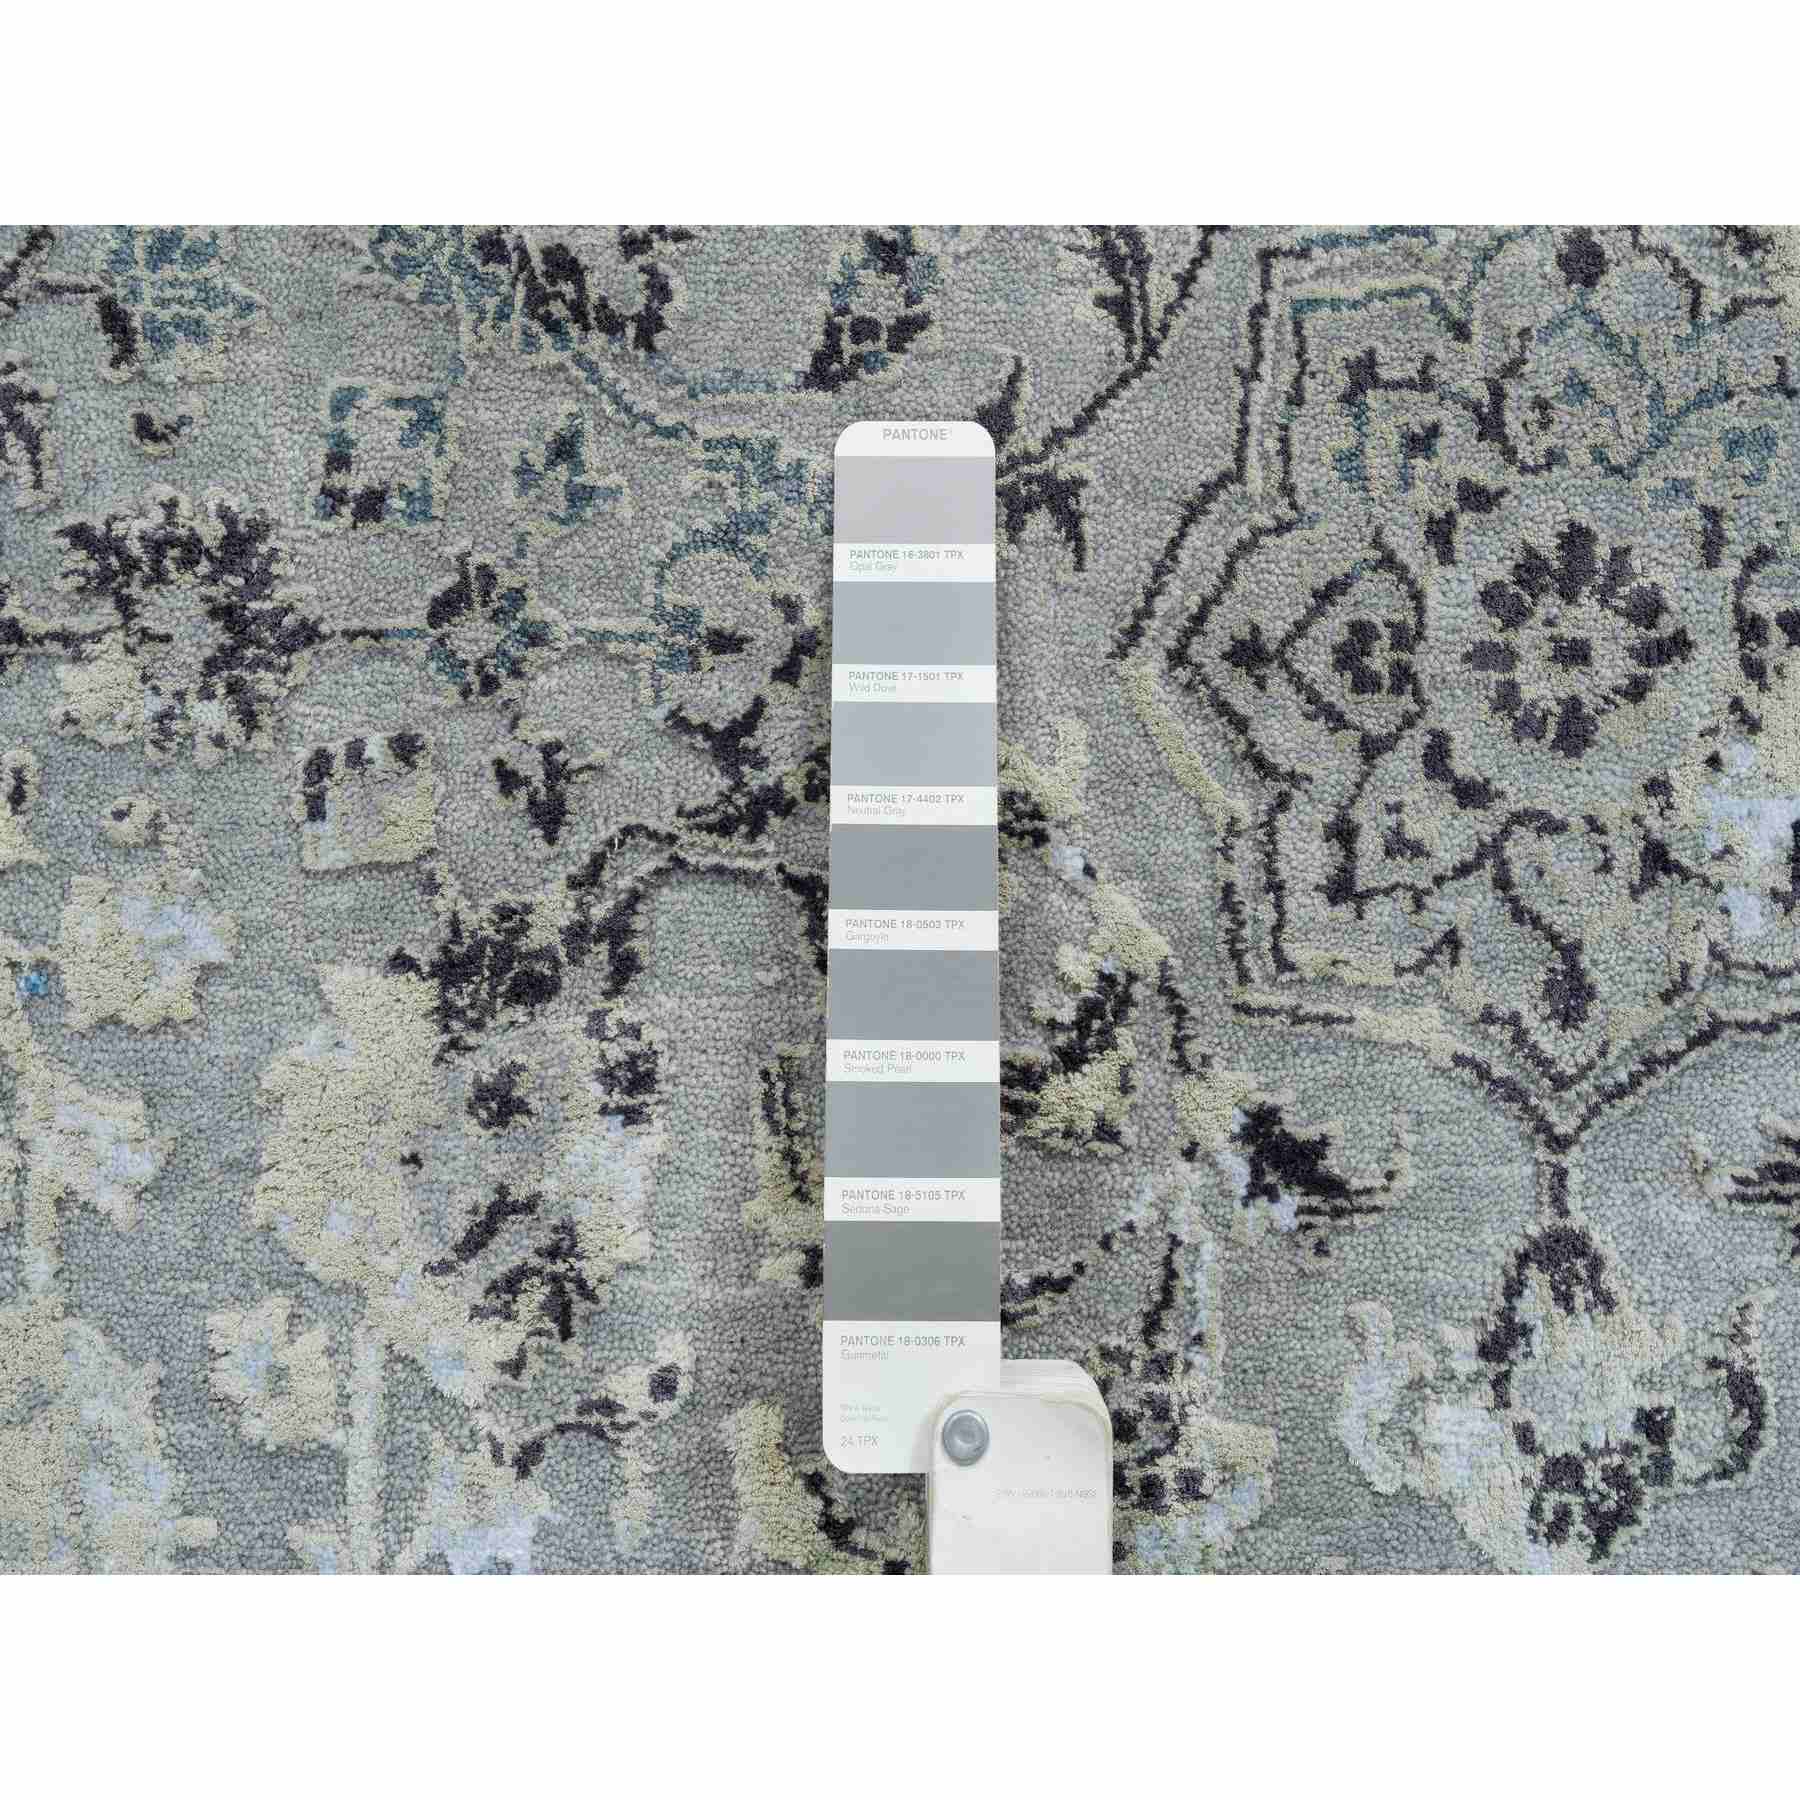 Transitional-Hand-Knotted-Rug-325125